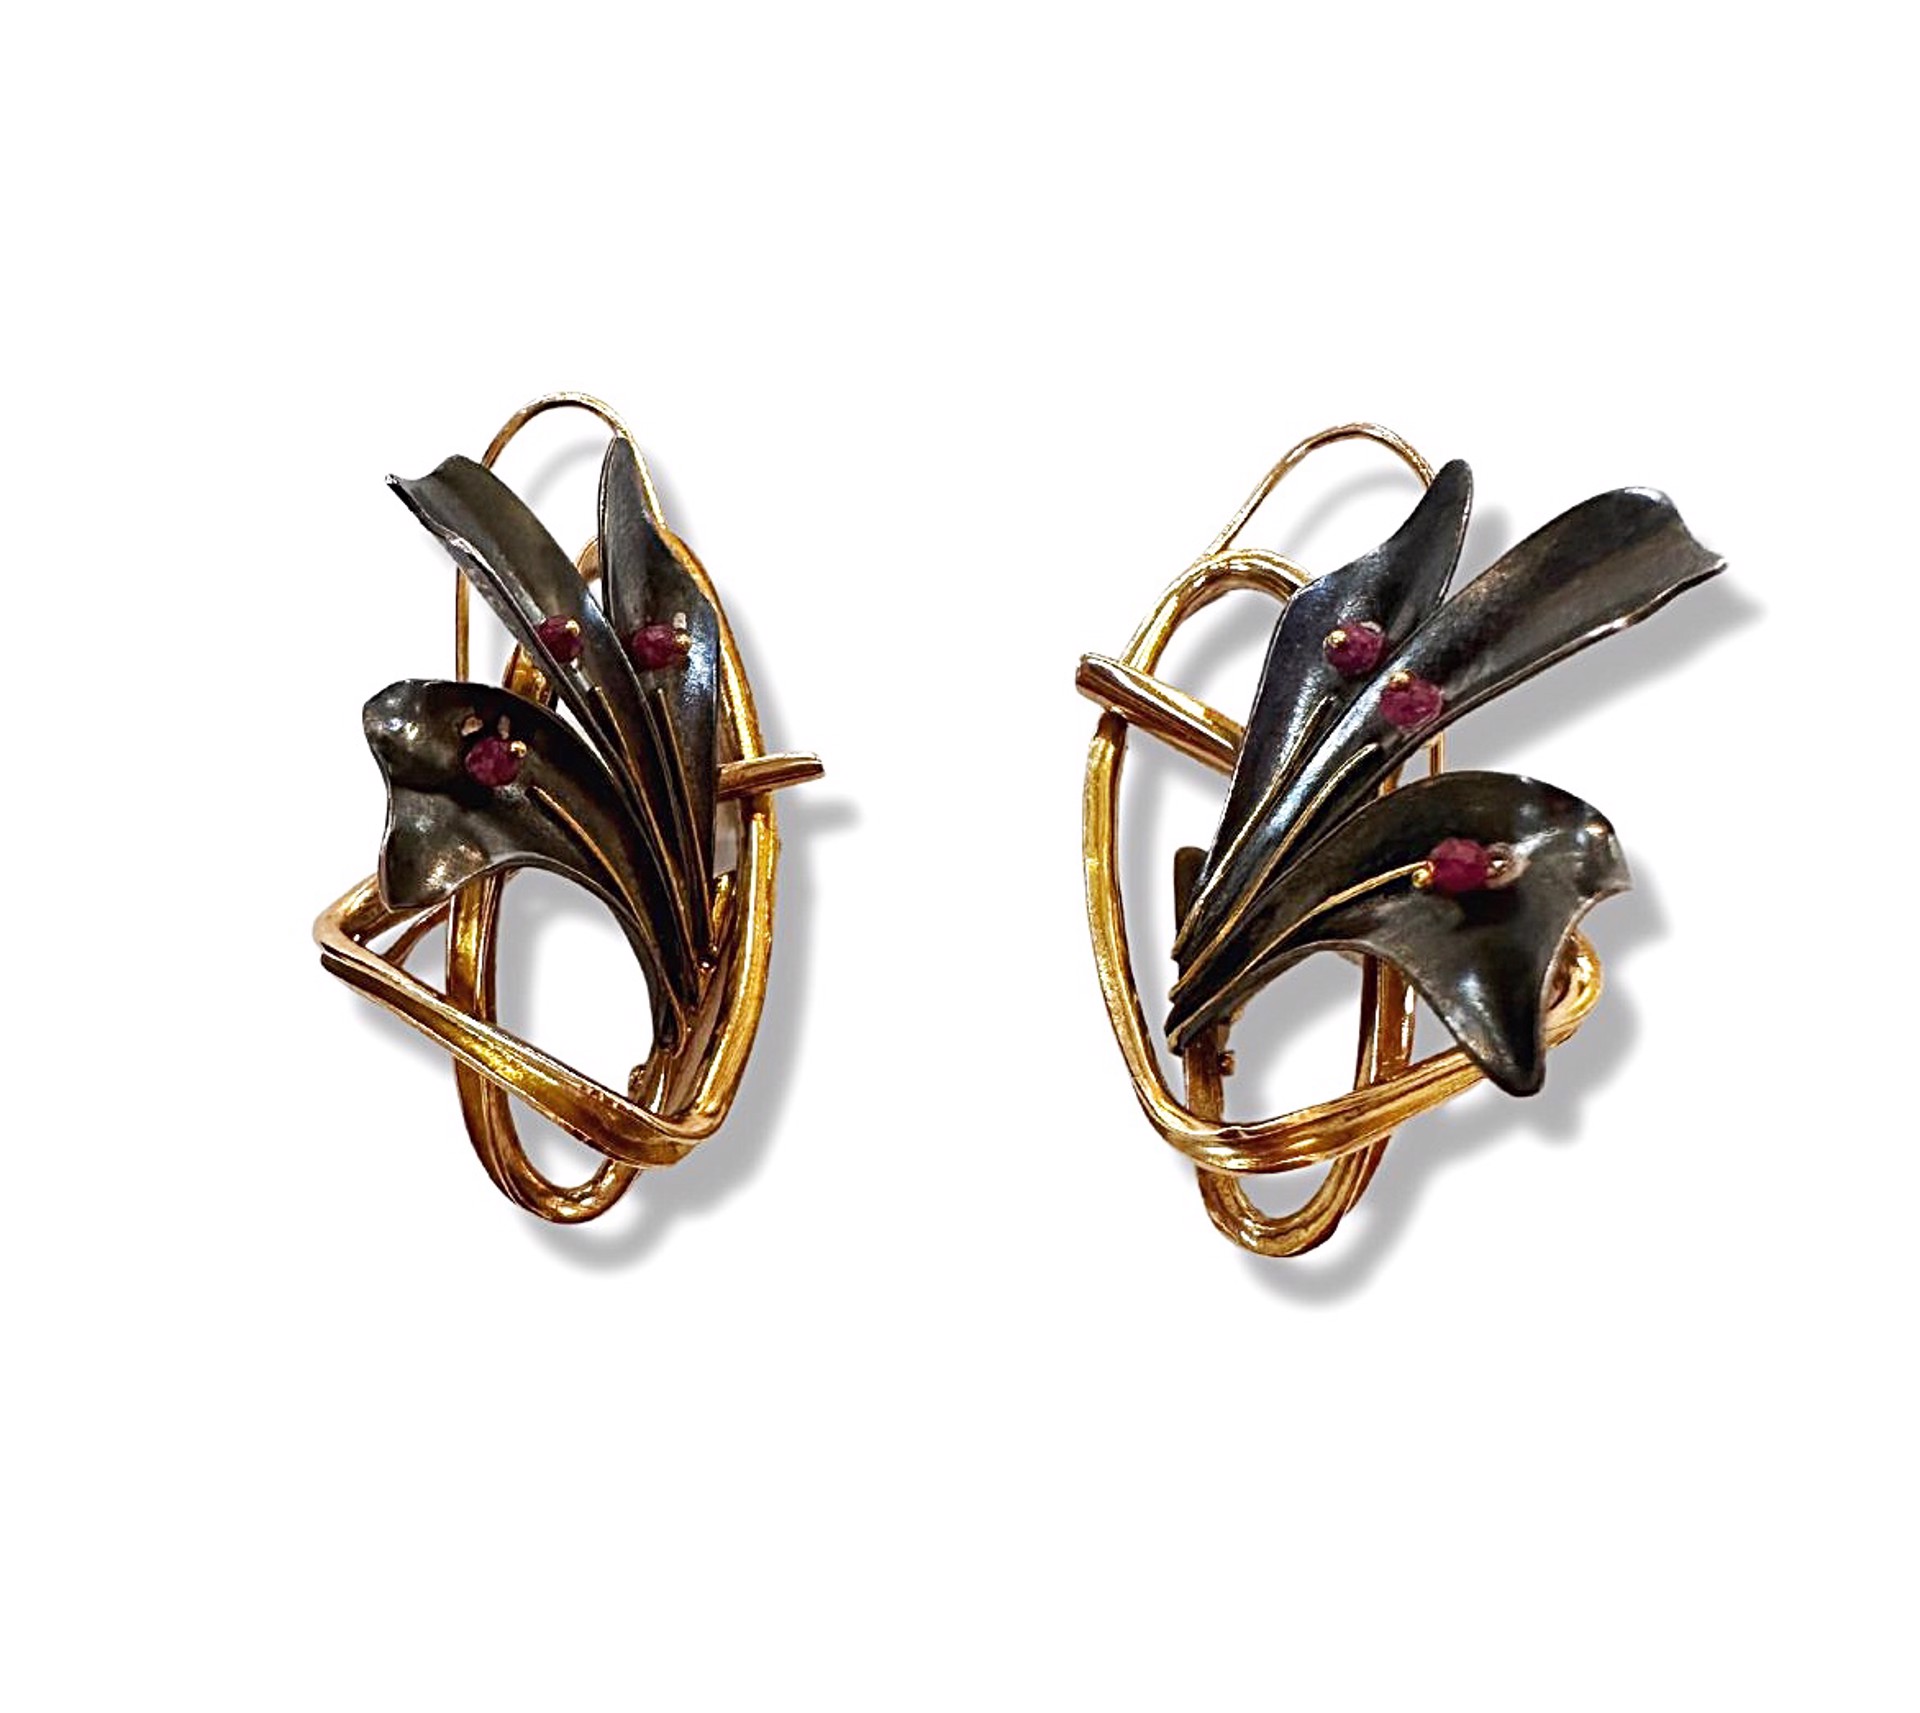 Earrings - Magnolia with 14K Gold and Rubies by Pattie Parkhurst